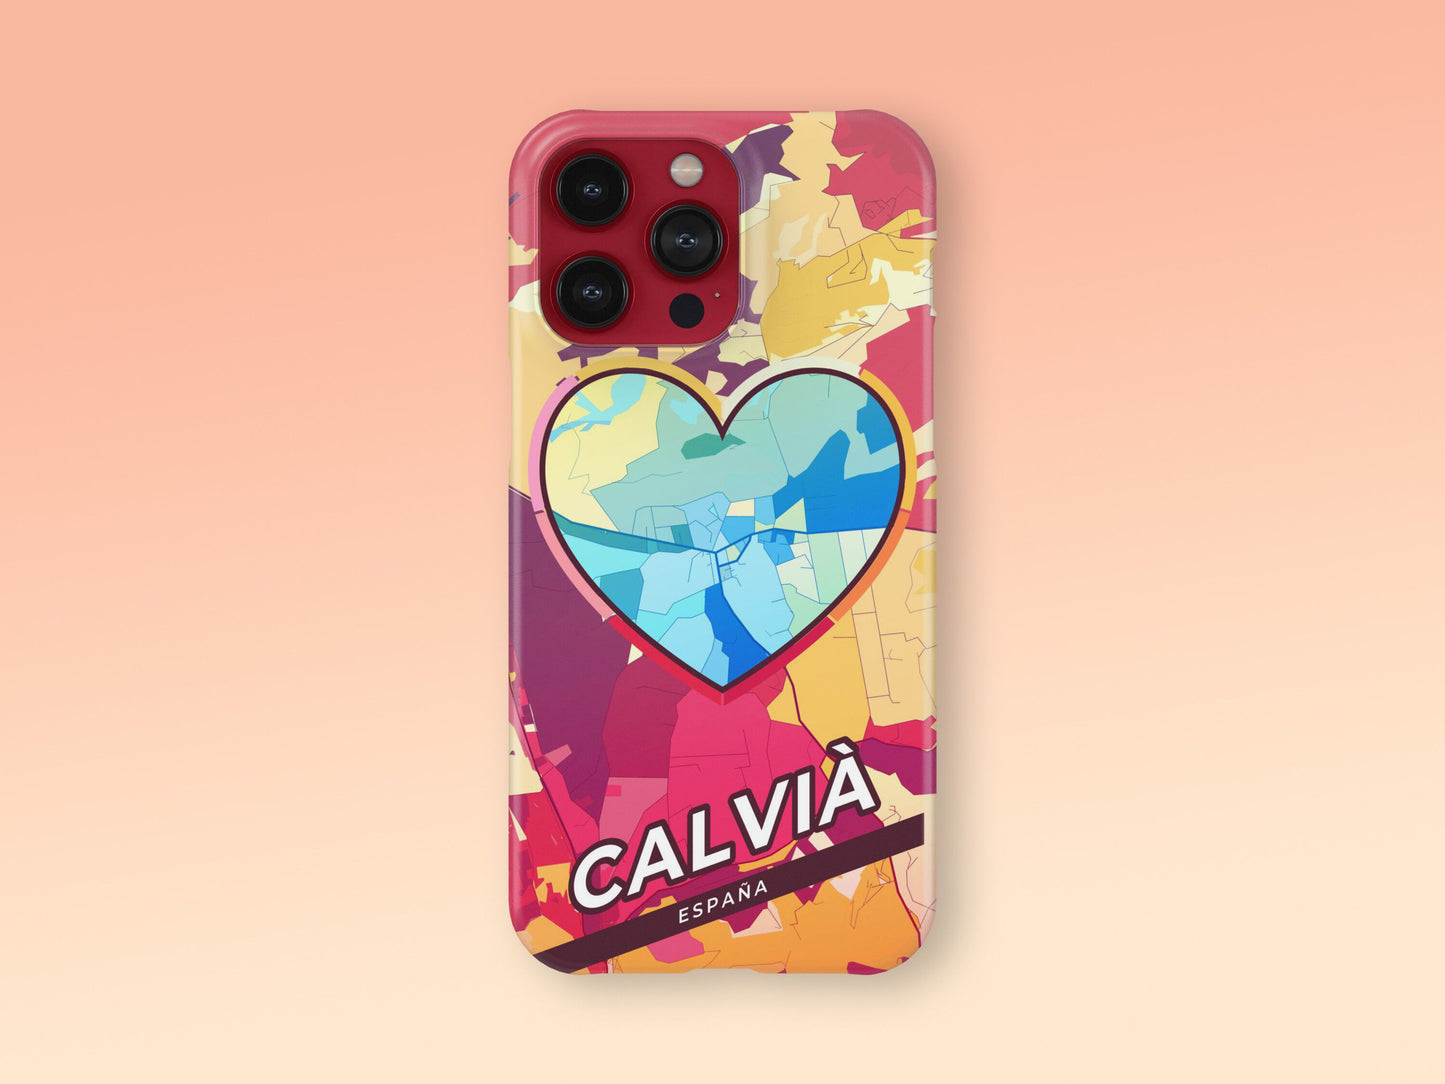 Calvià Spain slim phone case with colorful icon. Birthday, wedding or housewarming gift. Couple match cases. 2